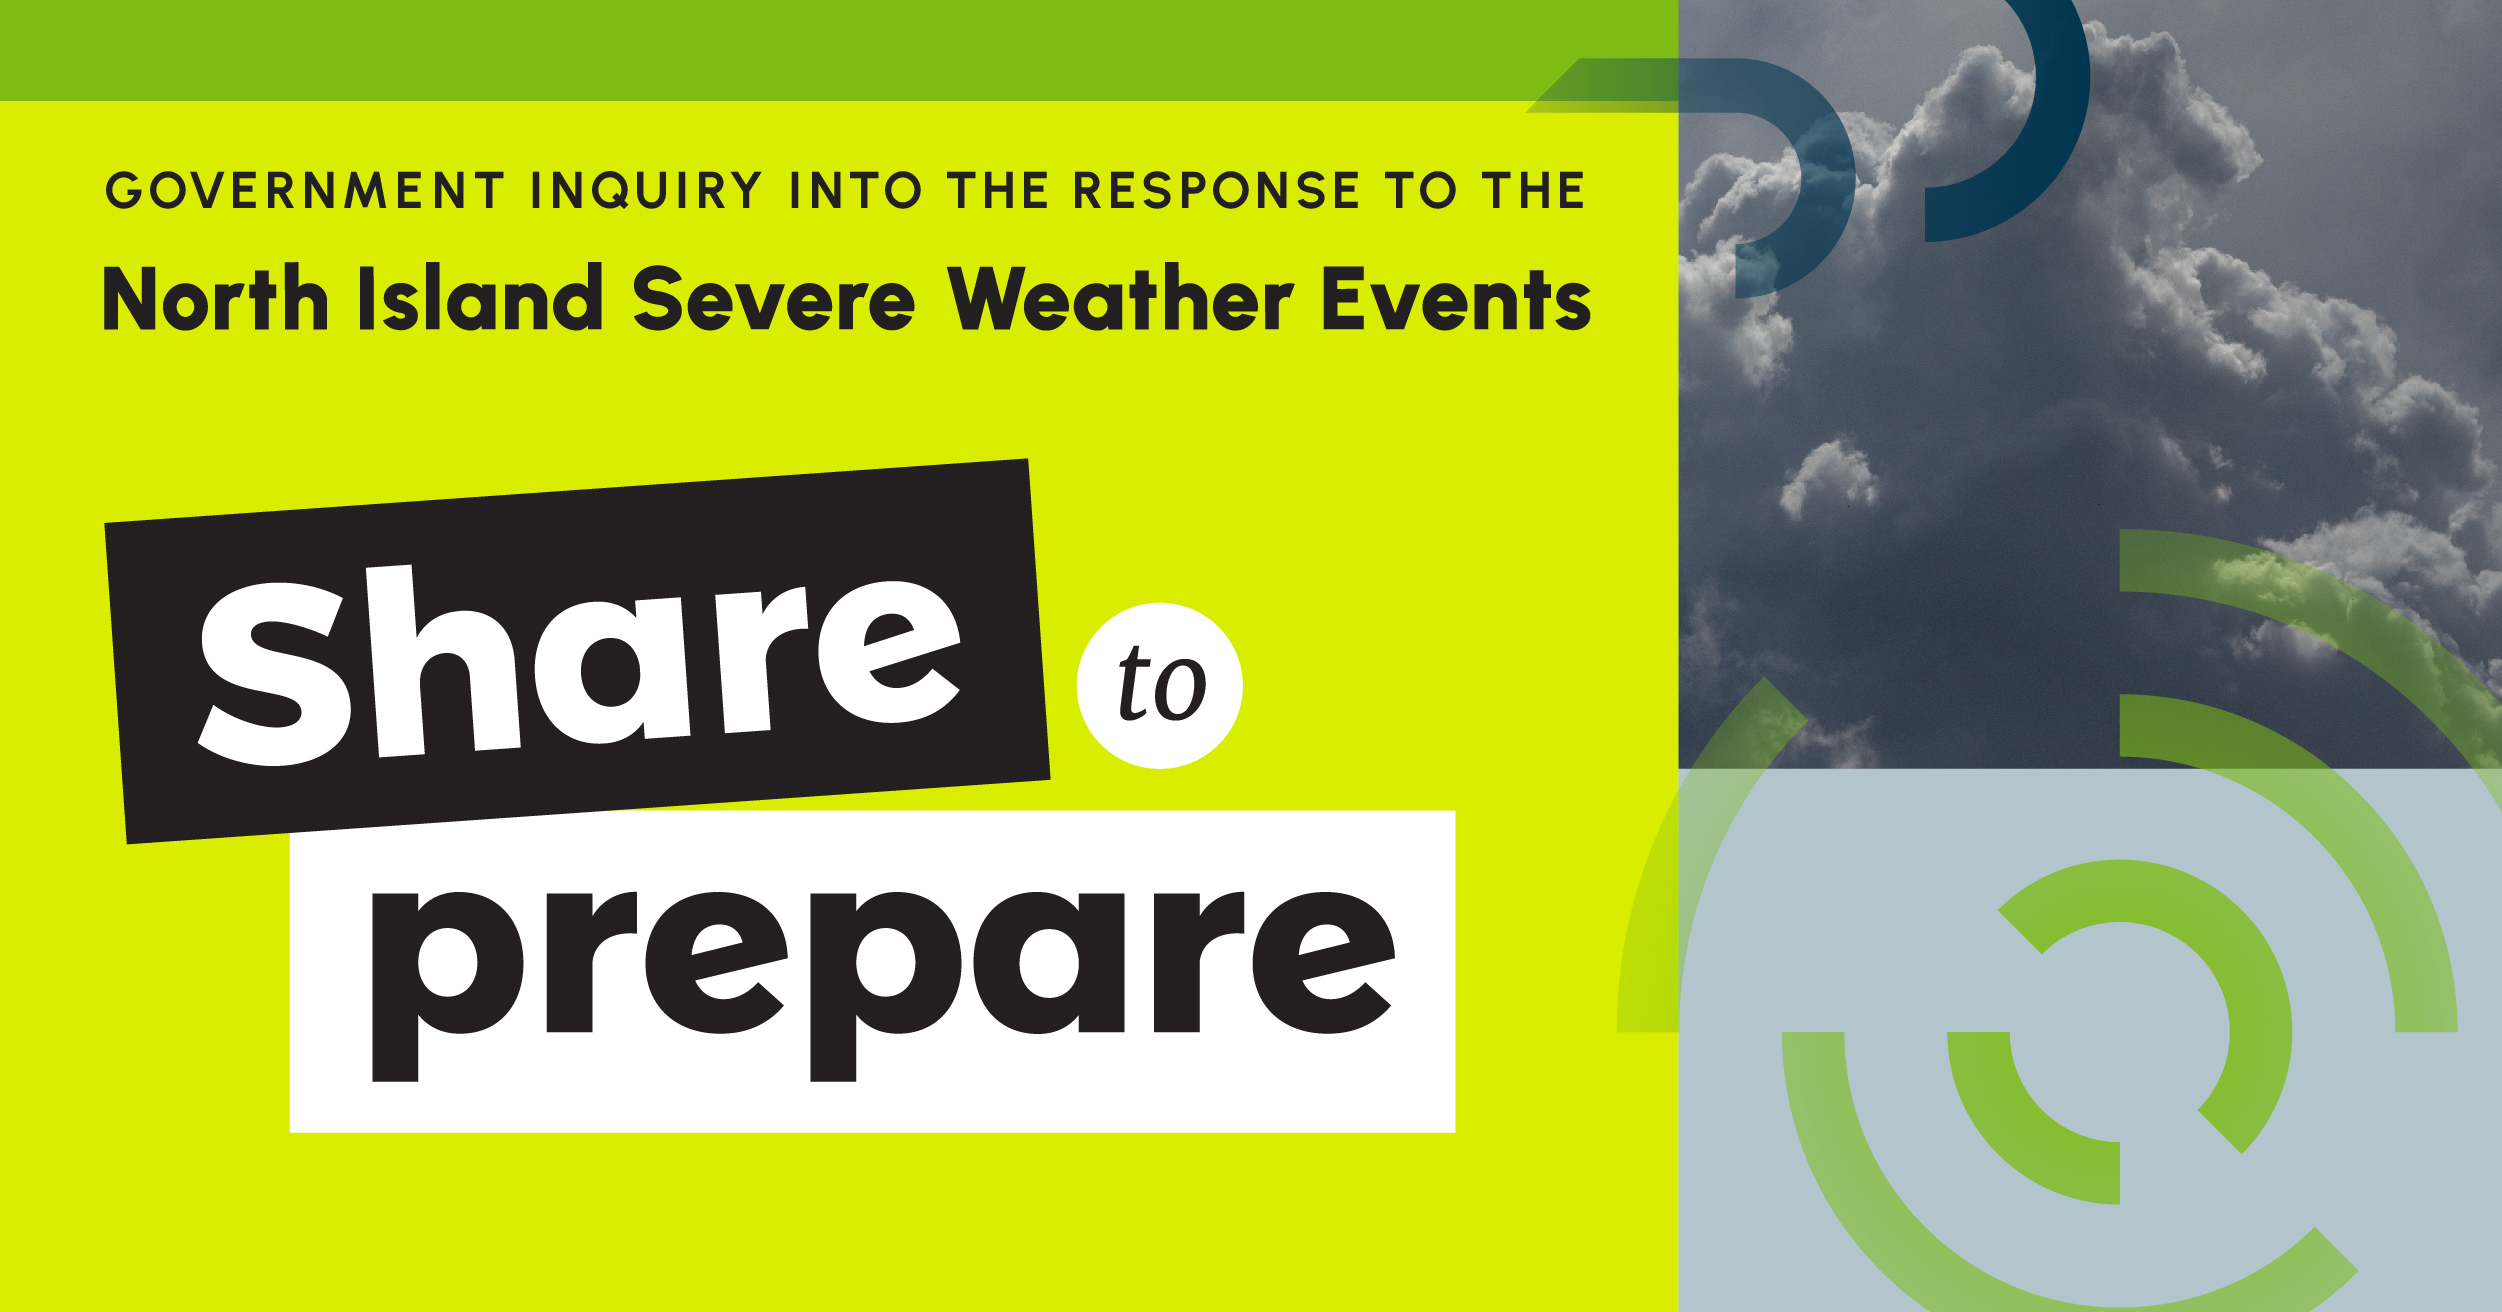 Please share your experience with us – Government Inquiry into the Response to the North Island Severe Weather Events